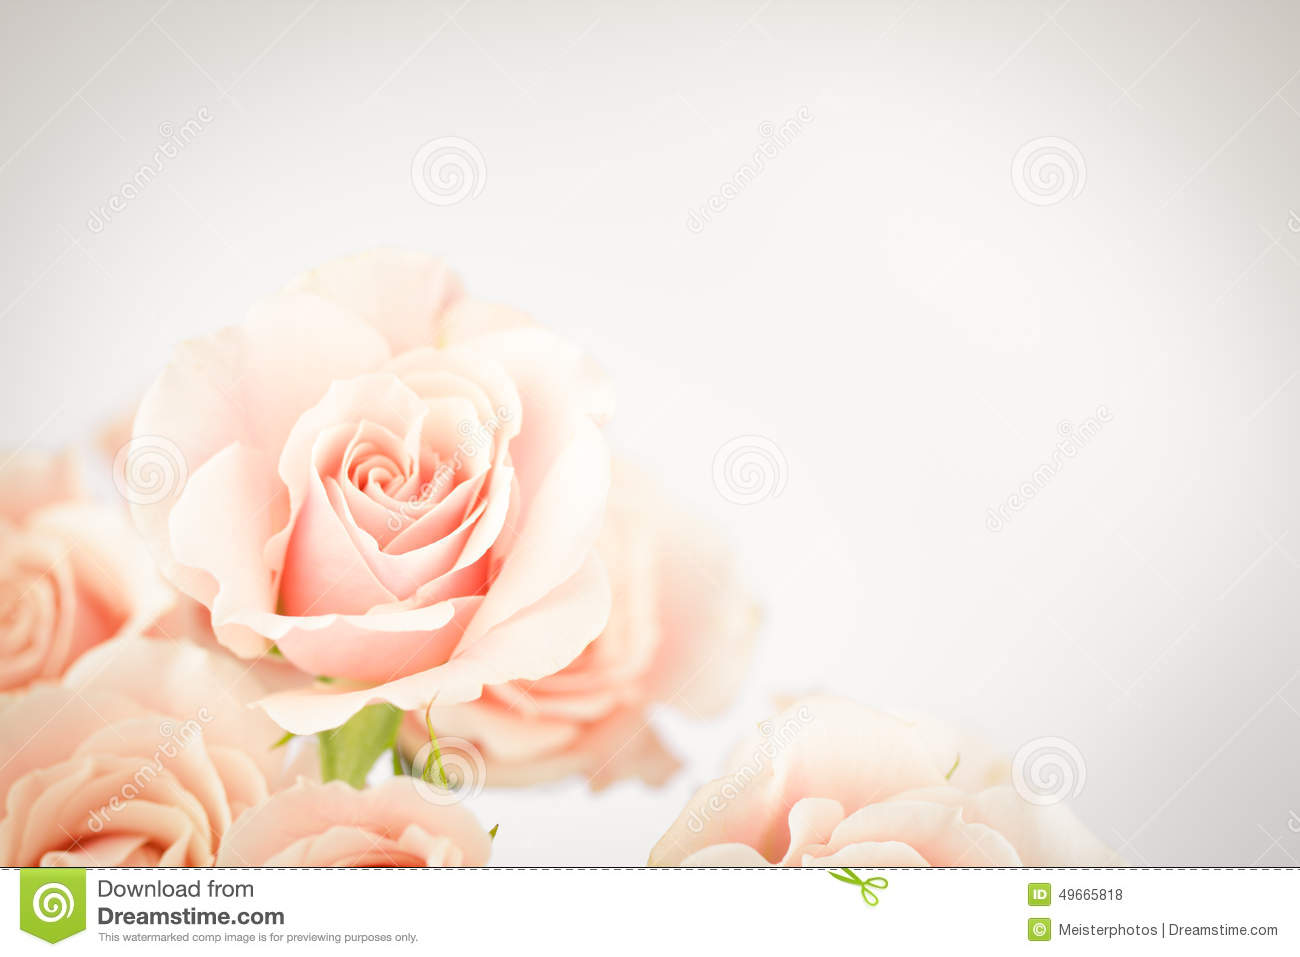 Peach Rose Cluster With Vignette Stock Photo   Image  49665818